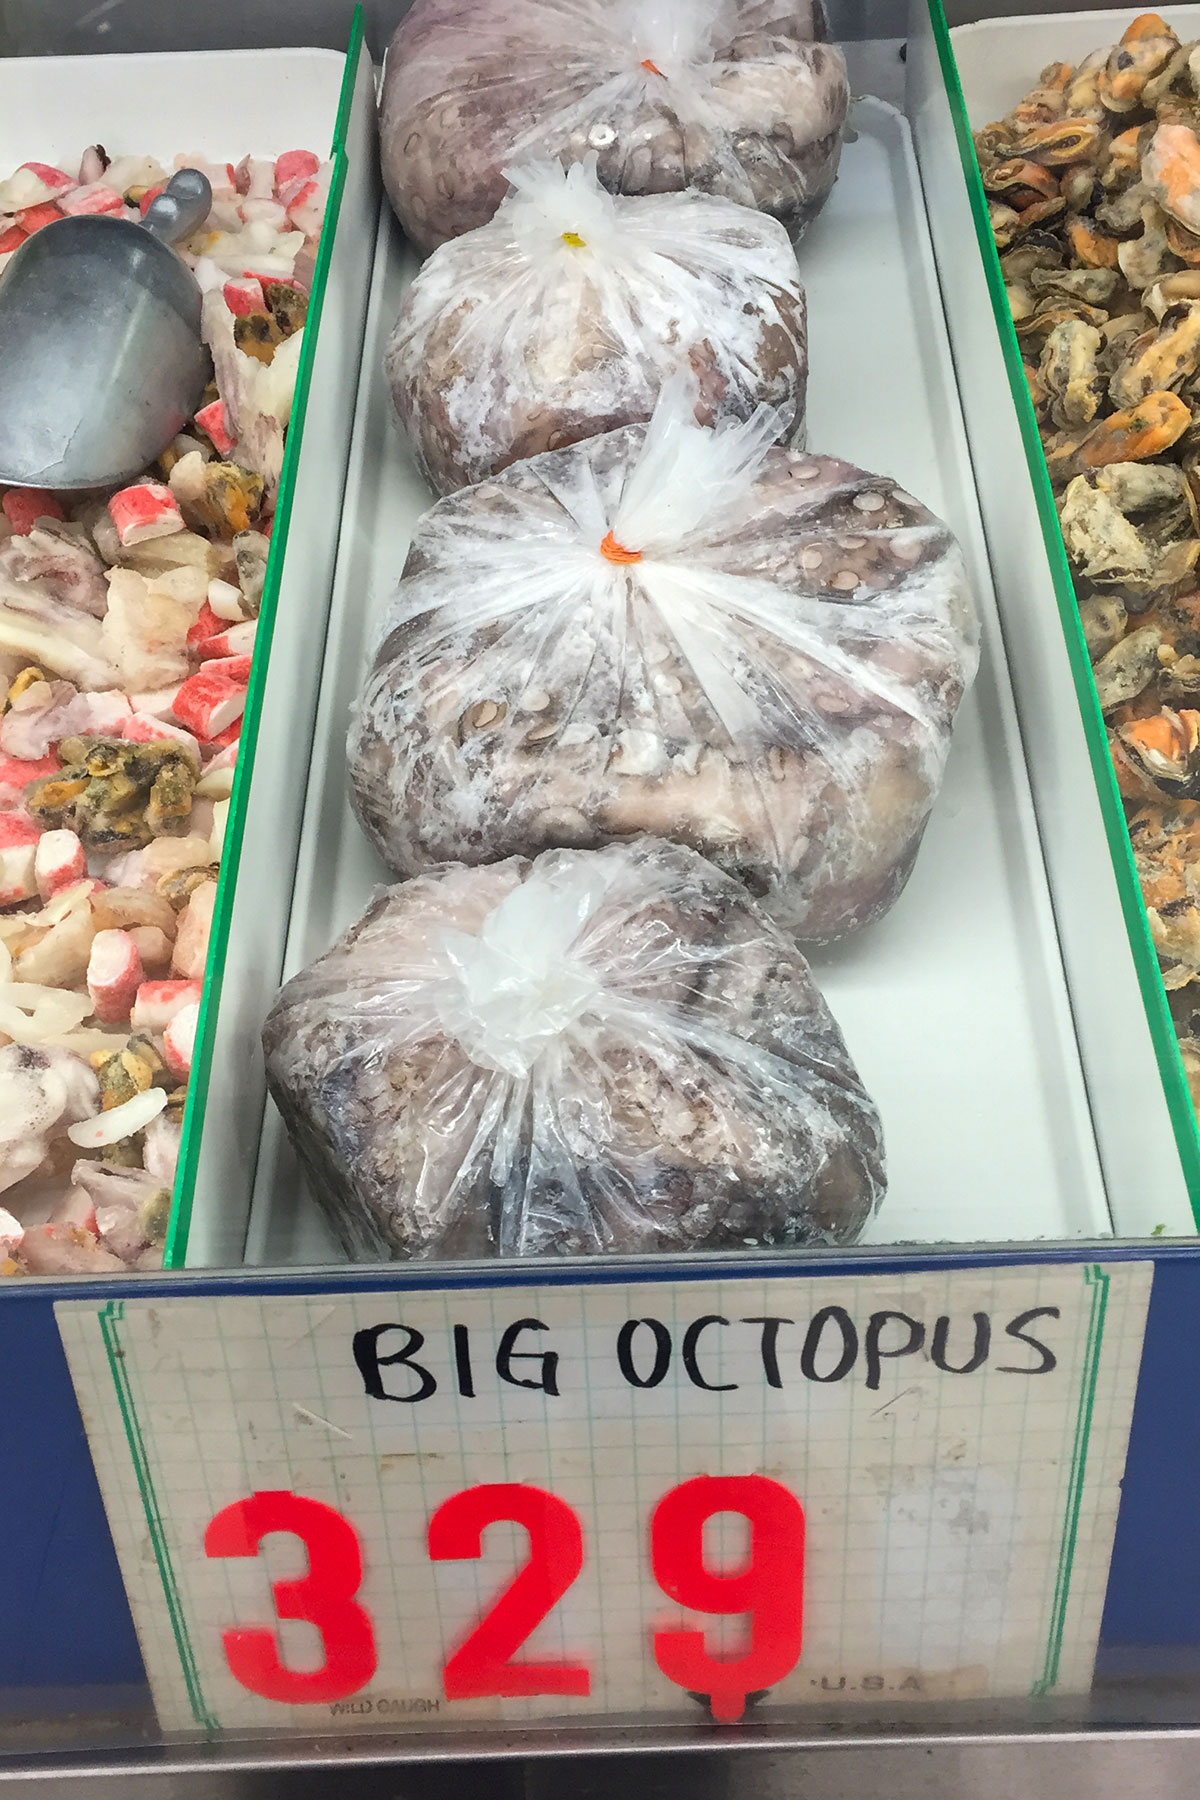 whole uncooked octopus at Asian market. 